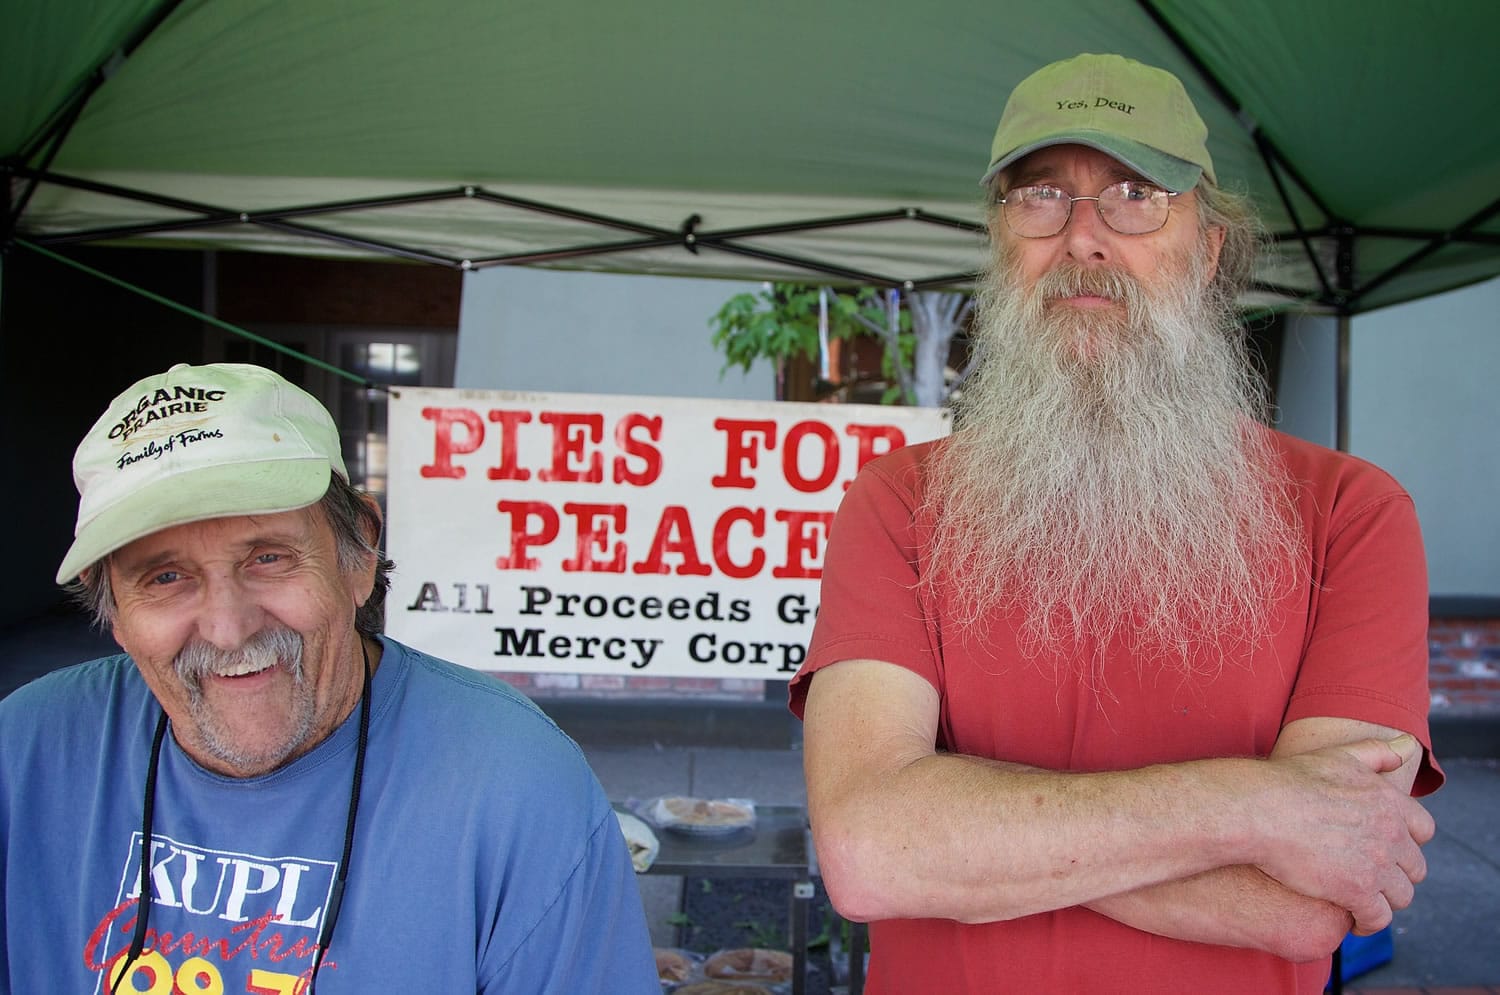 Roger Nipp, left, and Dale Case staff the &quot;Pies for Peace&quot; booth May 7 at the Forest Grove Farmers Market in Forest Grove, Ore.